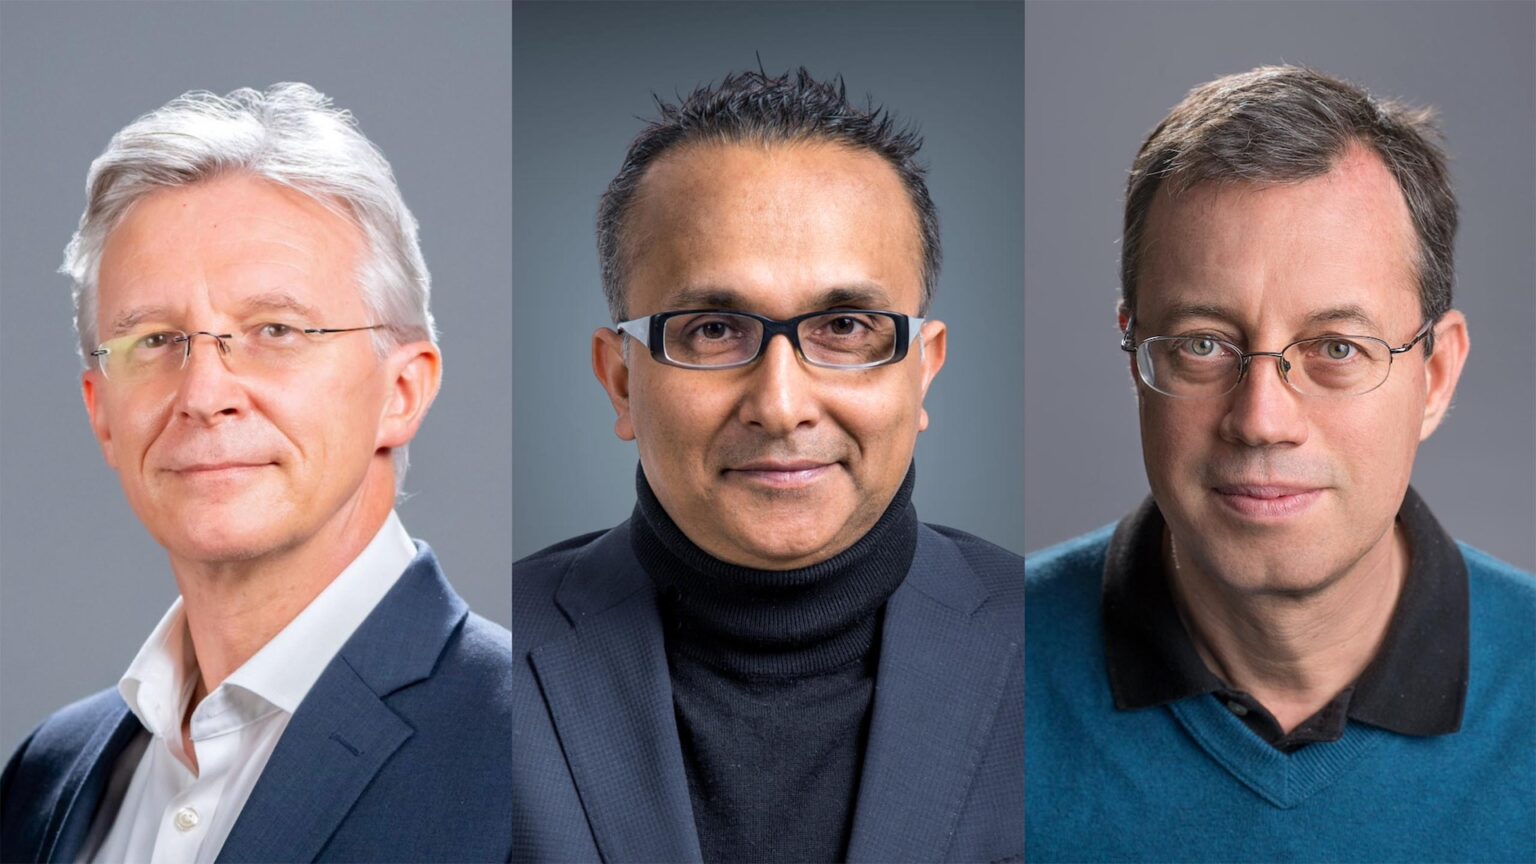 Headshots of Arpad Horvath, Ravi Prasher and Ion Stoica